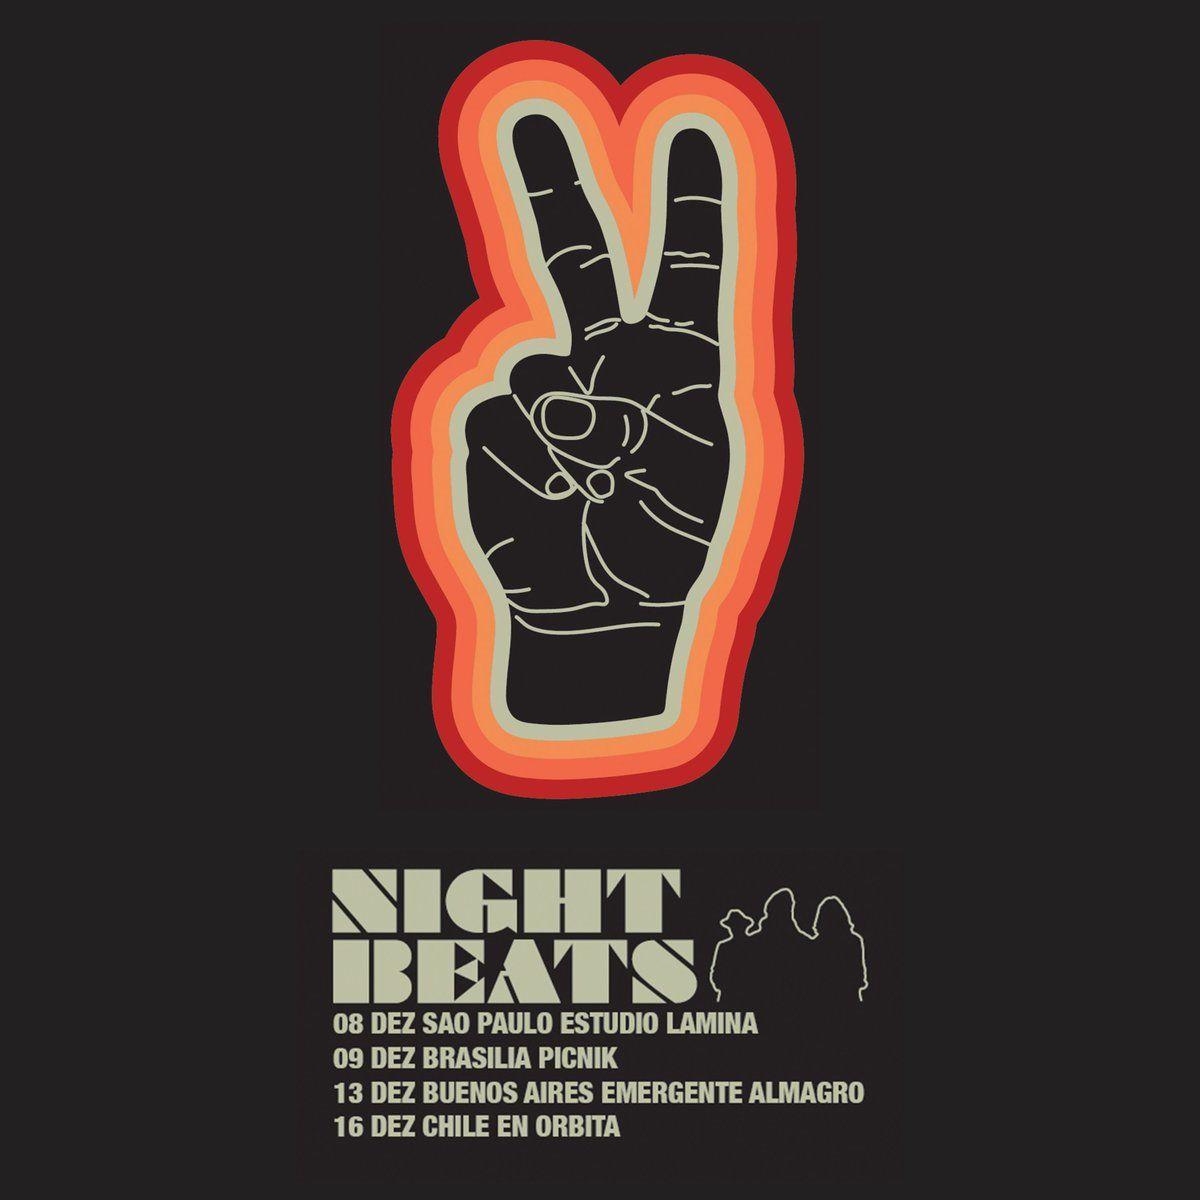 Night Beats Logo - Night Beats're so excited to announce our first tour